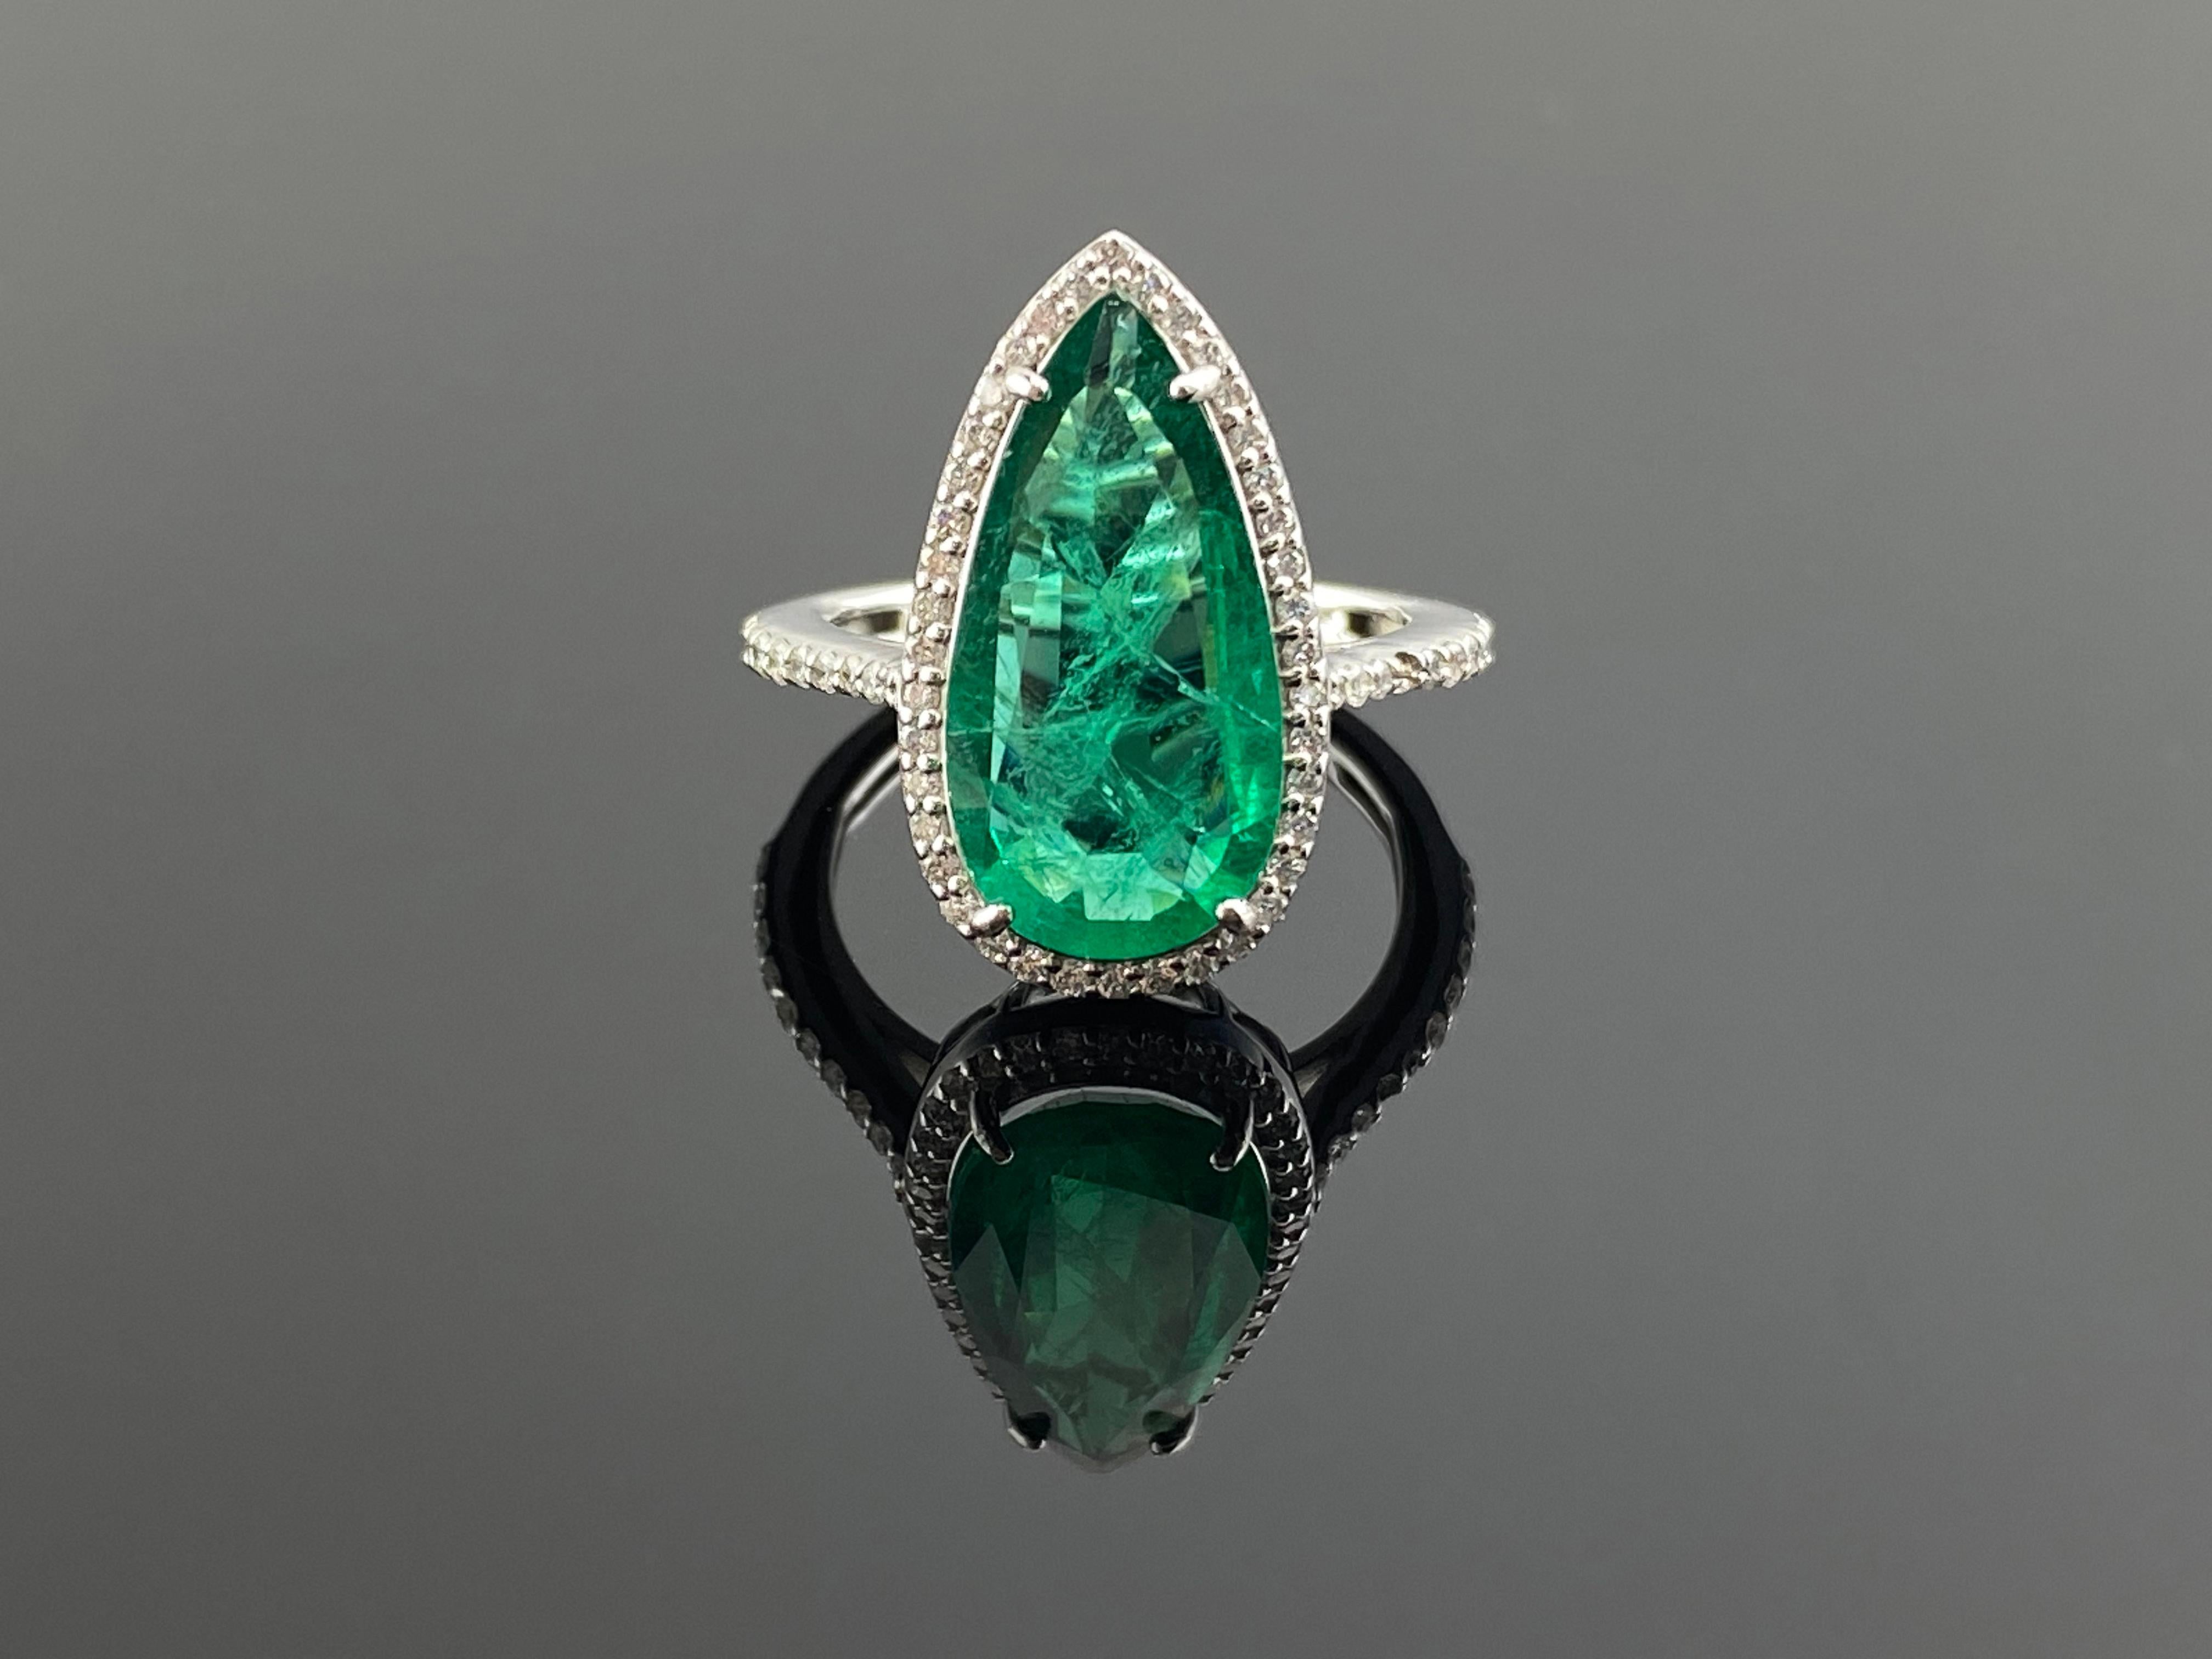 A stunning Halo Ring featuring a Certificate 3.20 Carat pear shaped natural Zambian Emerald and 0.44 Carats of Diamond set in solid 18K Gold. People have admired emerald’s green for thousands of years. Emeralds have always been associated with the